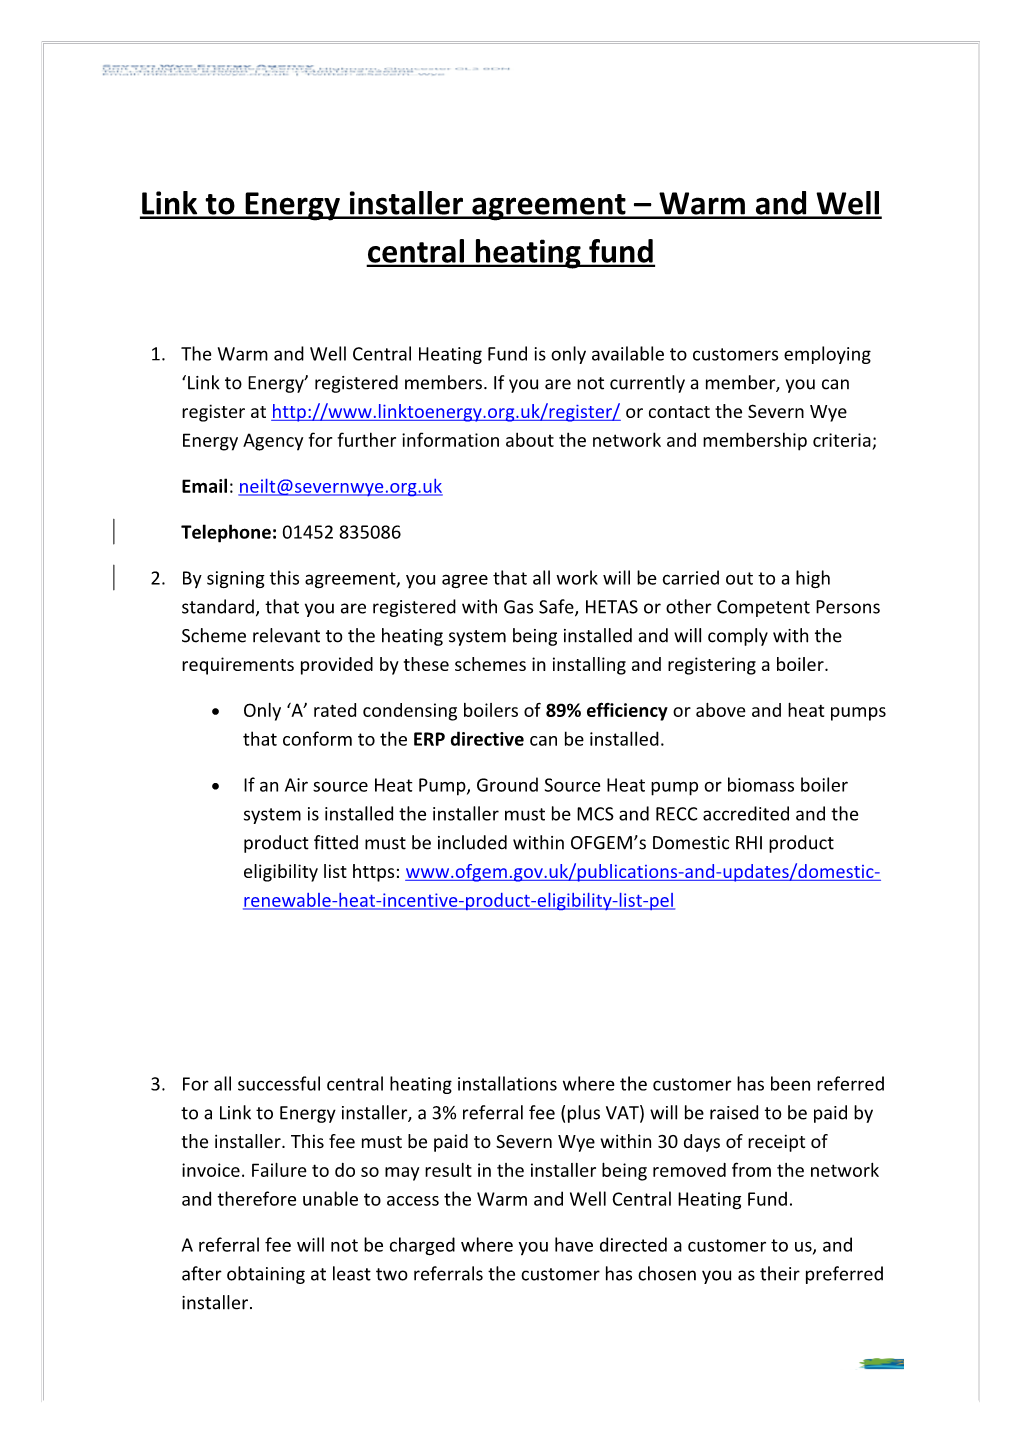 Link to Energy Installer Agreement Warm and Well Central Heating Fund